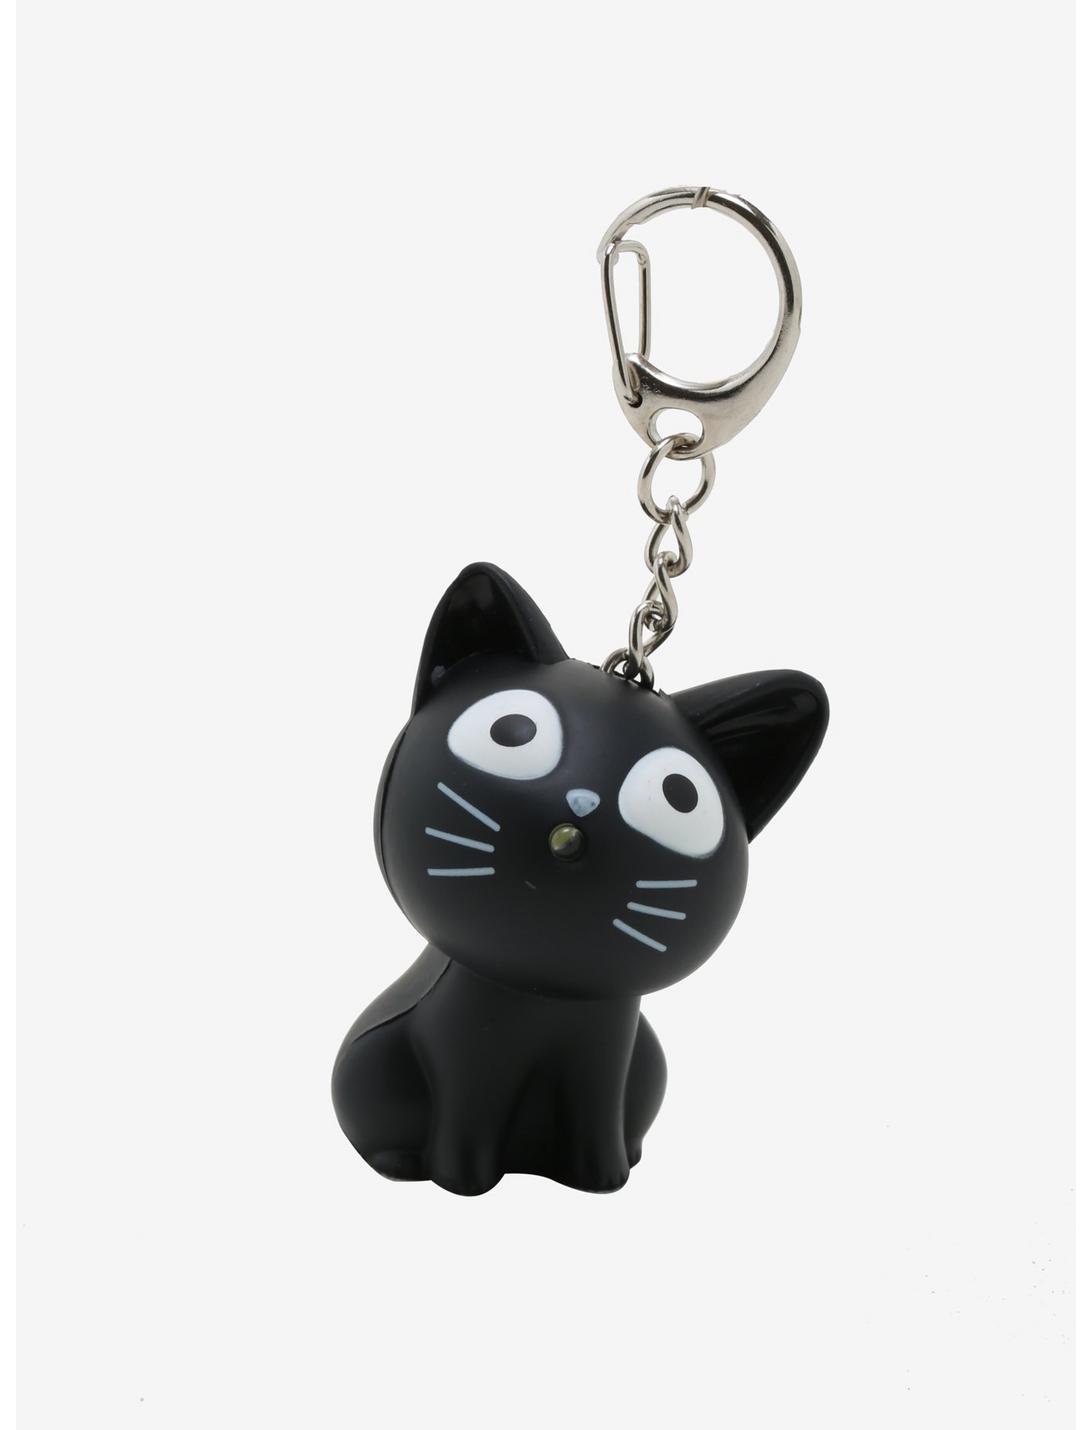 Kitten Sound & LED Assorted Key Chain, , hi-res